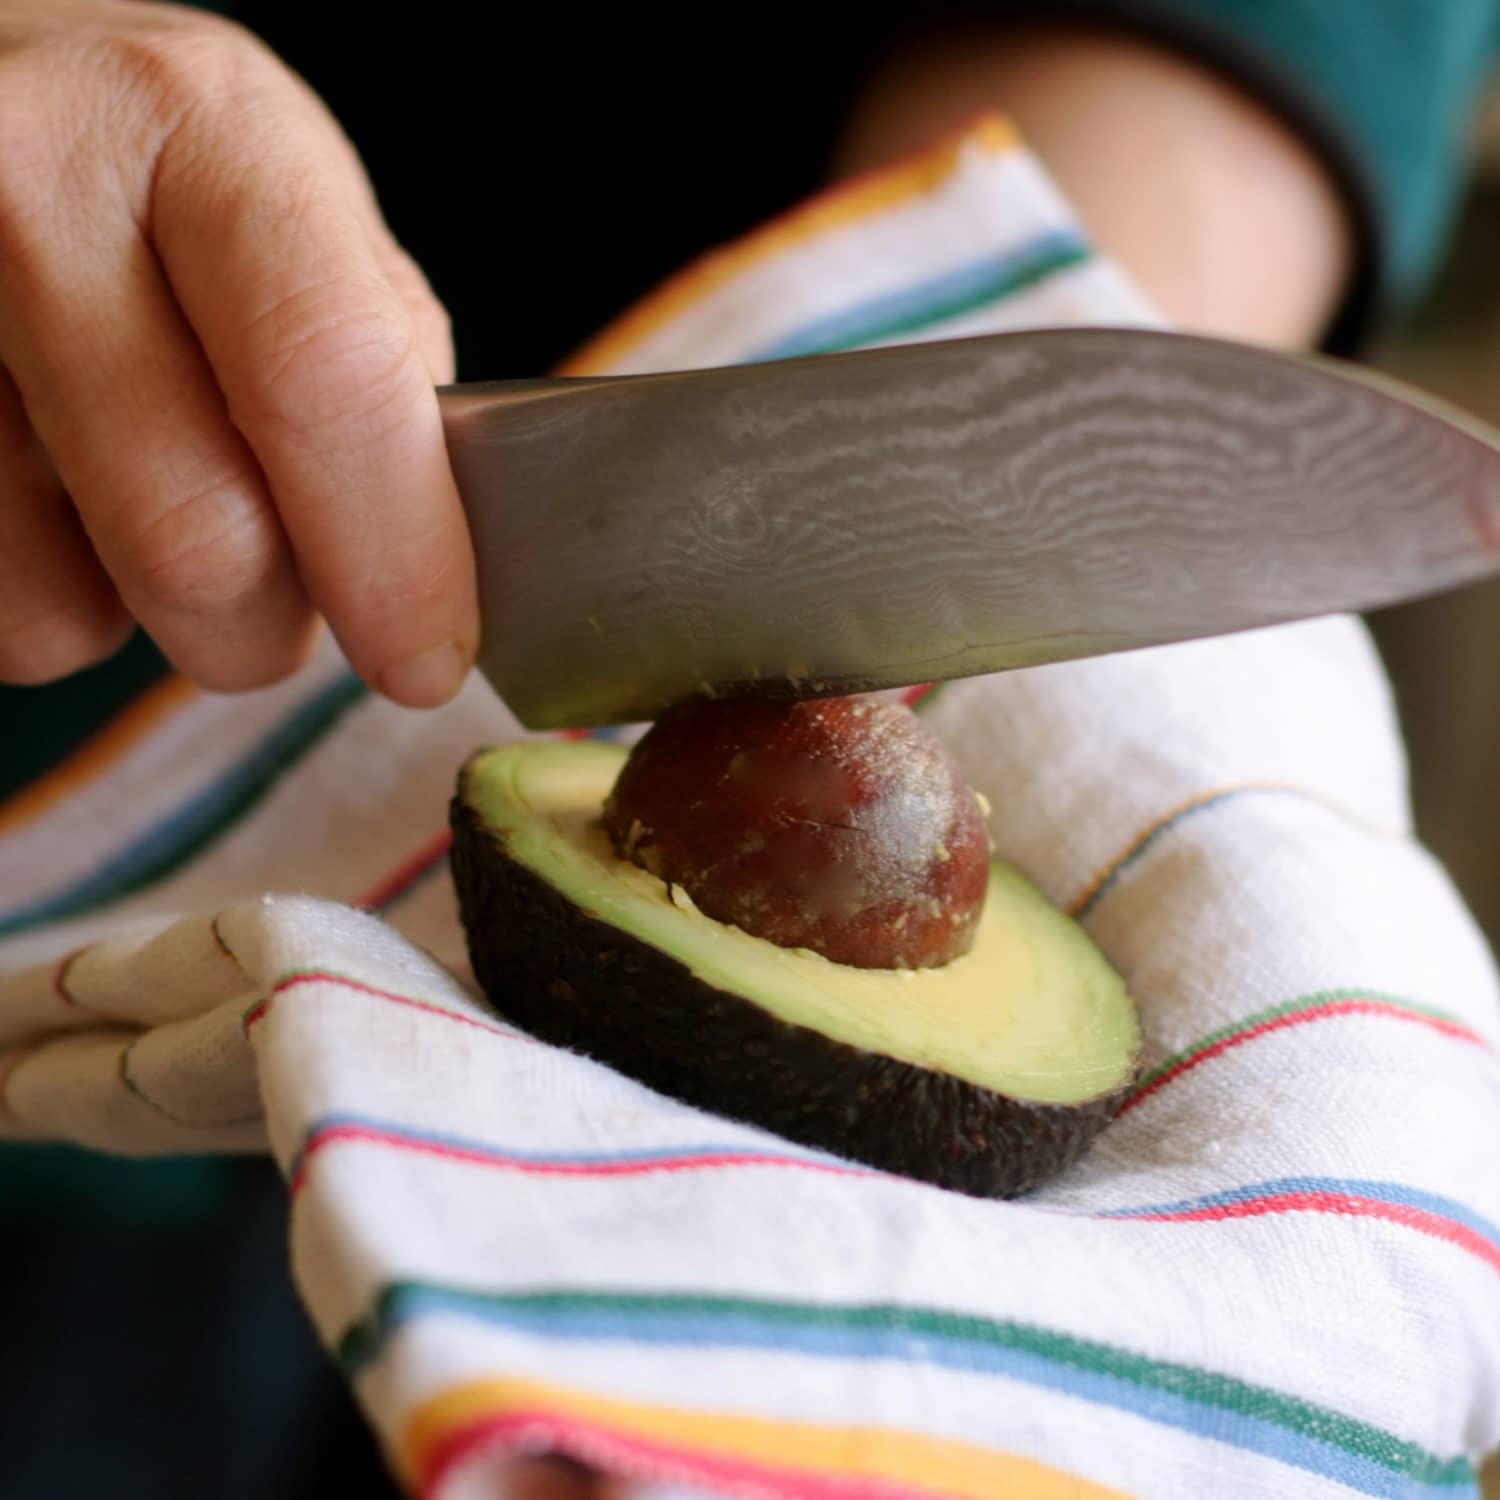 This is the best knife to use for cutting an avocado